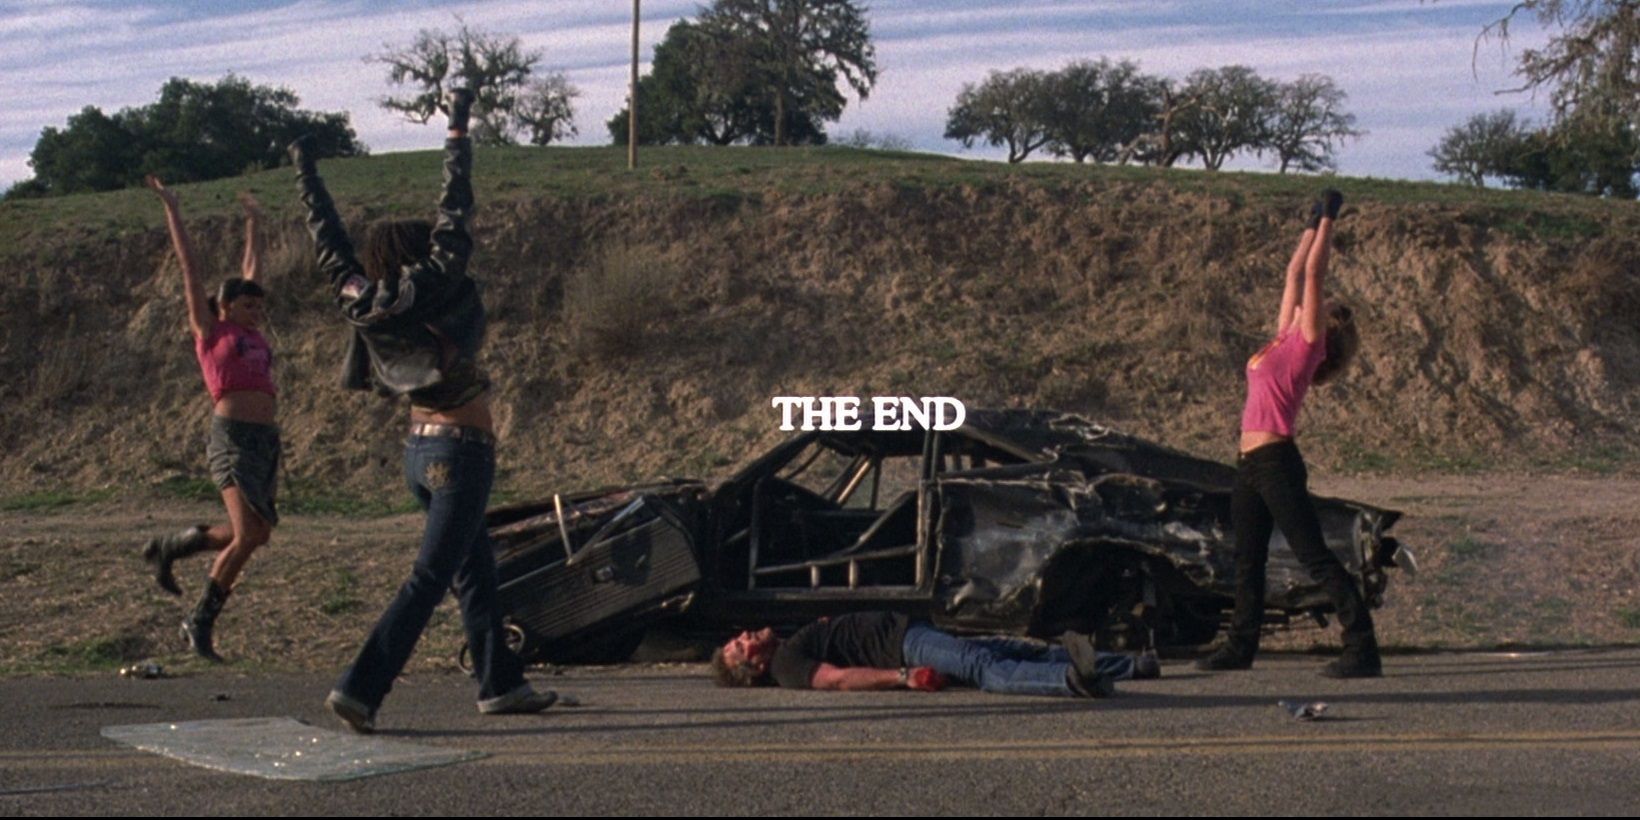 The girls beat up Stuntman Mike at the end of Death Proof